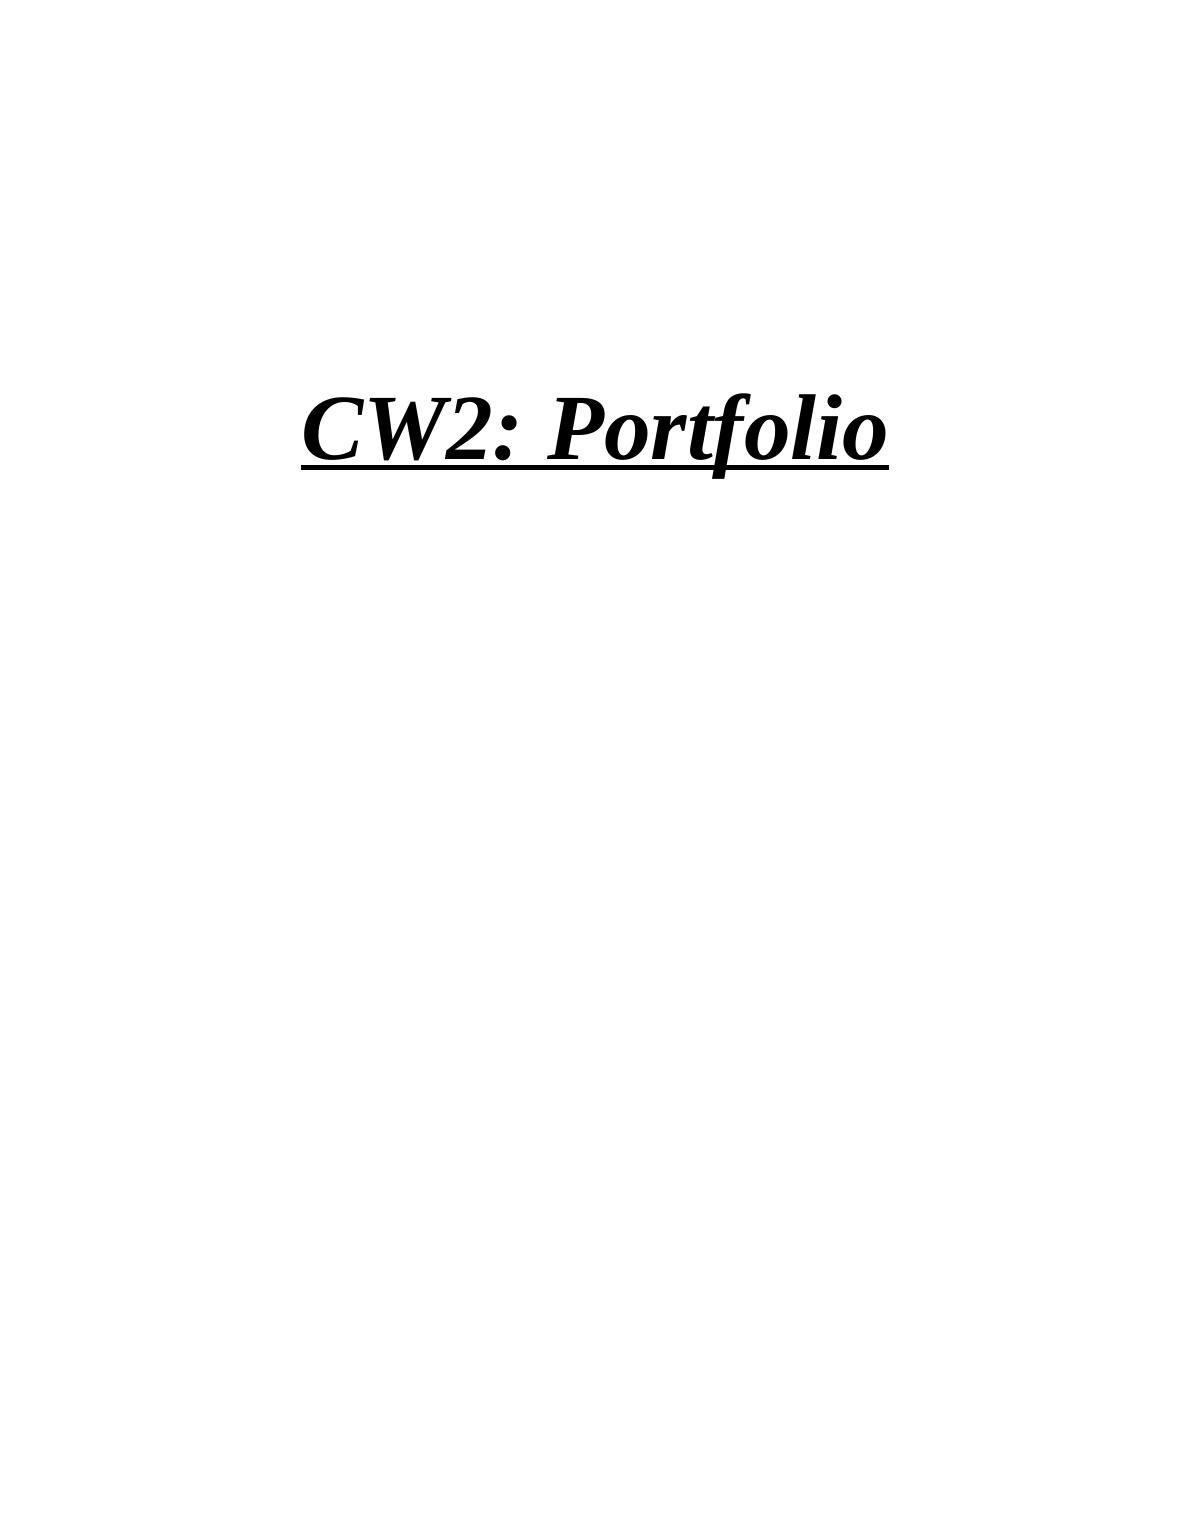 CW2: Portfolio INTRODUCTION 2 Skill reflection, Group and Team Skills 3 Plagiarism 4 How Skills Help in AcADEMIC LIFE 4 CONCLUSION 6 Types of Graphs 8 Critical Thinking 8 Examples 10 INTRODUCTION Port_1